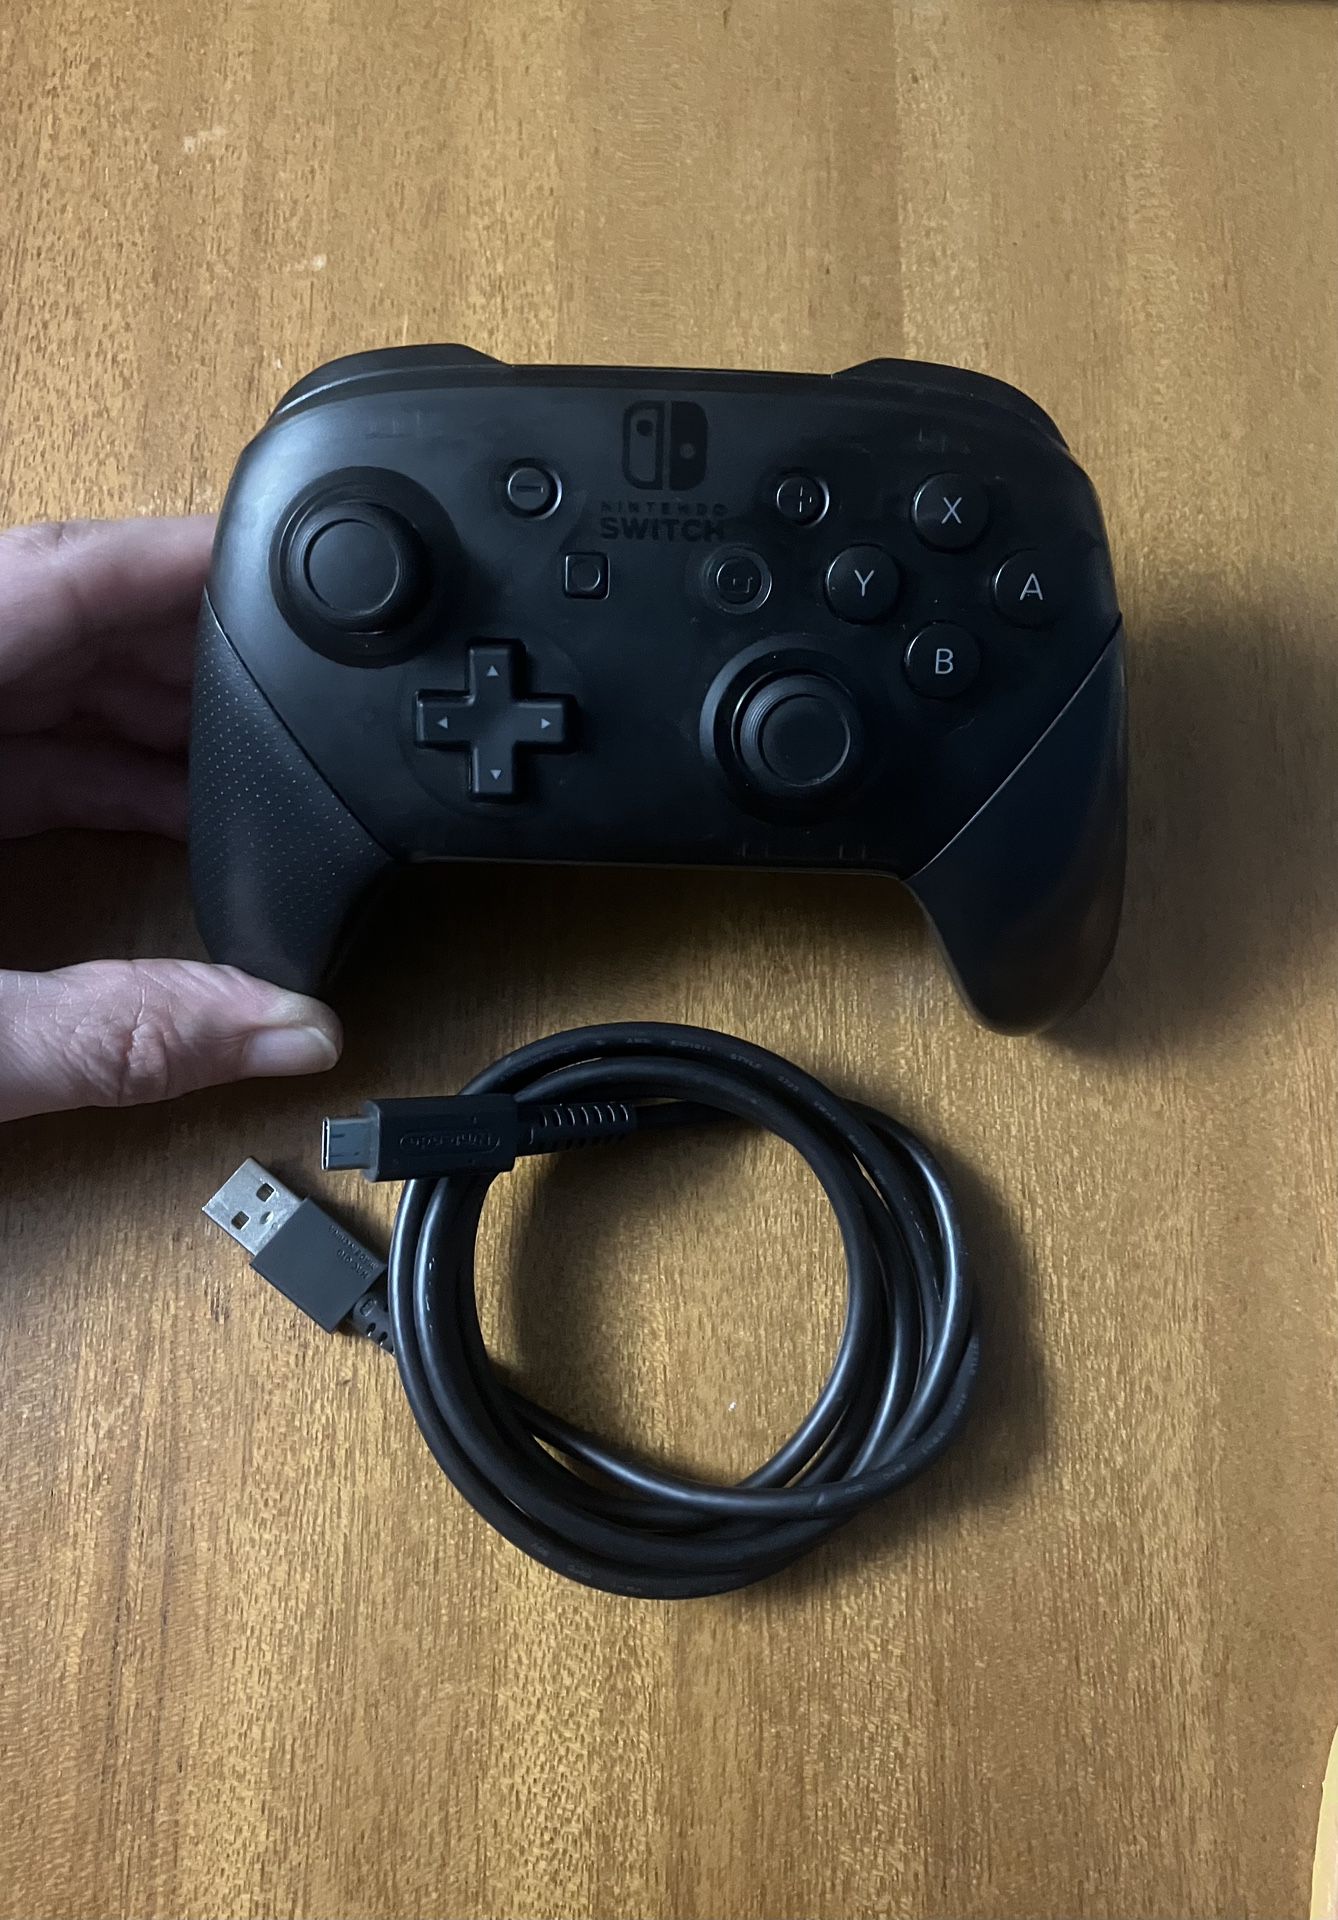 Nintendo Switch Pro Controller Genuine Authentic wireless control for OLED Lite Black Rechargeable + Charging Cable